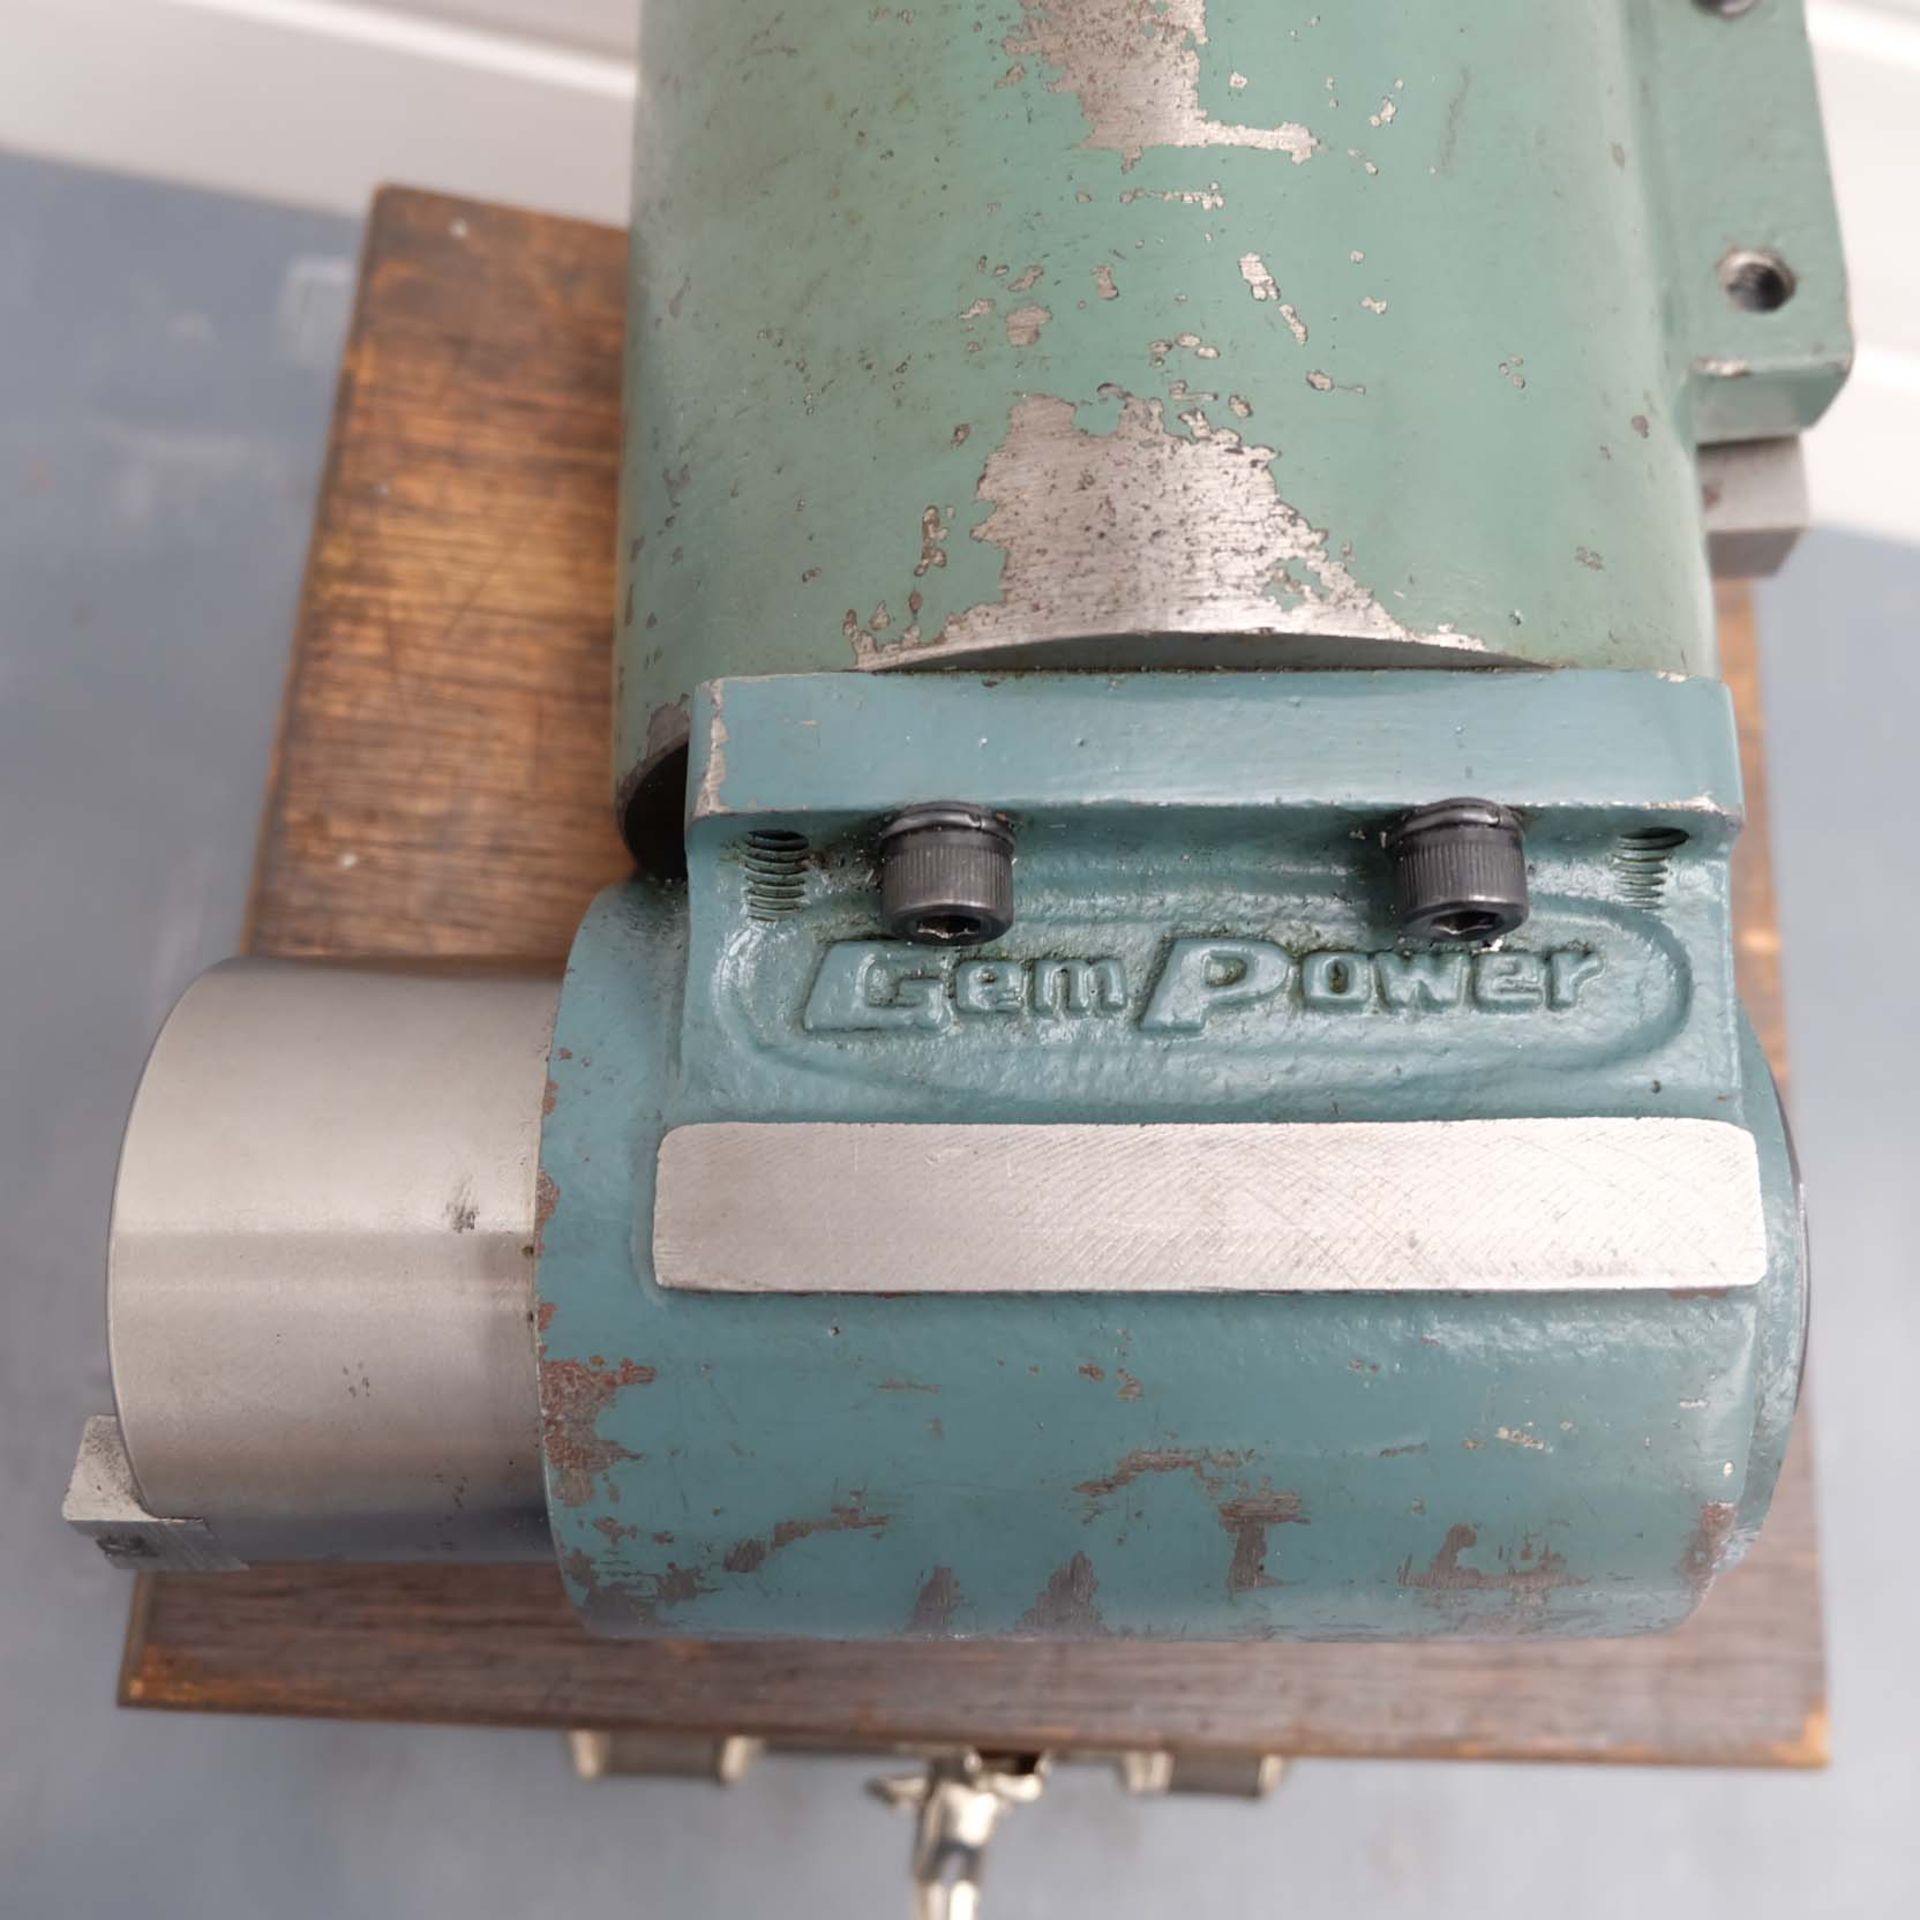 Gem Power Right Angle Milling Attachment. - Image 8 of 8